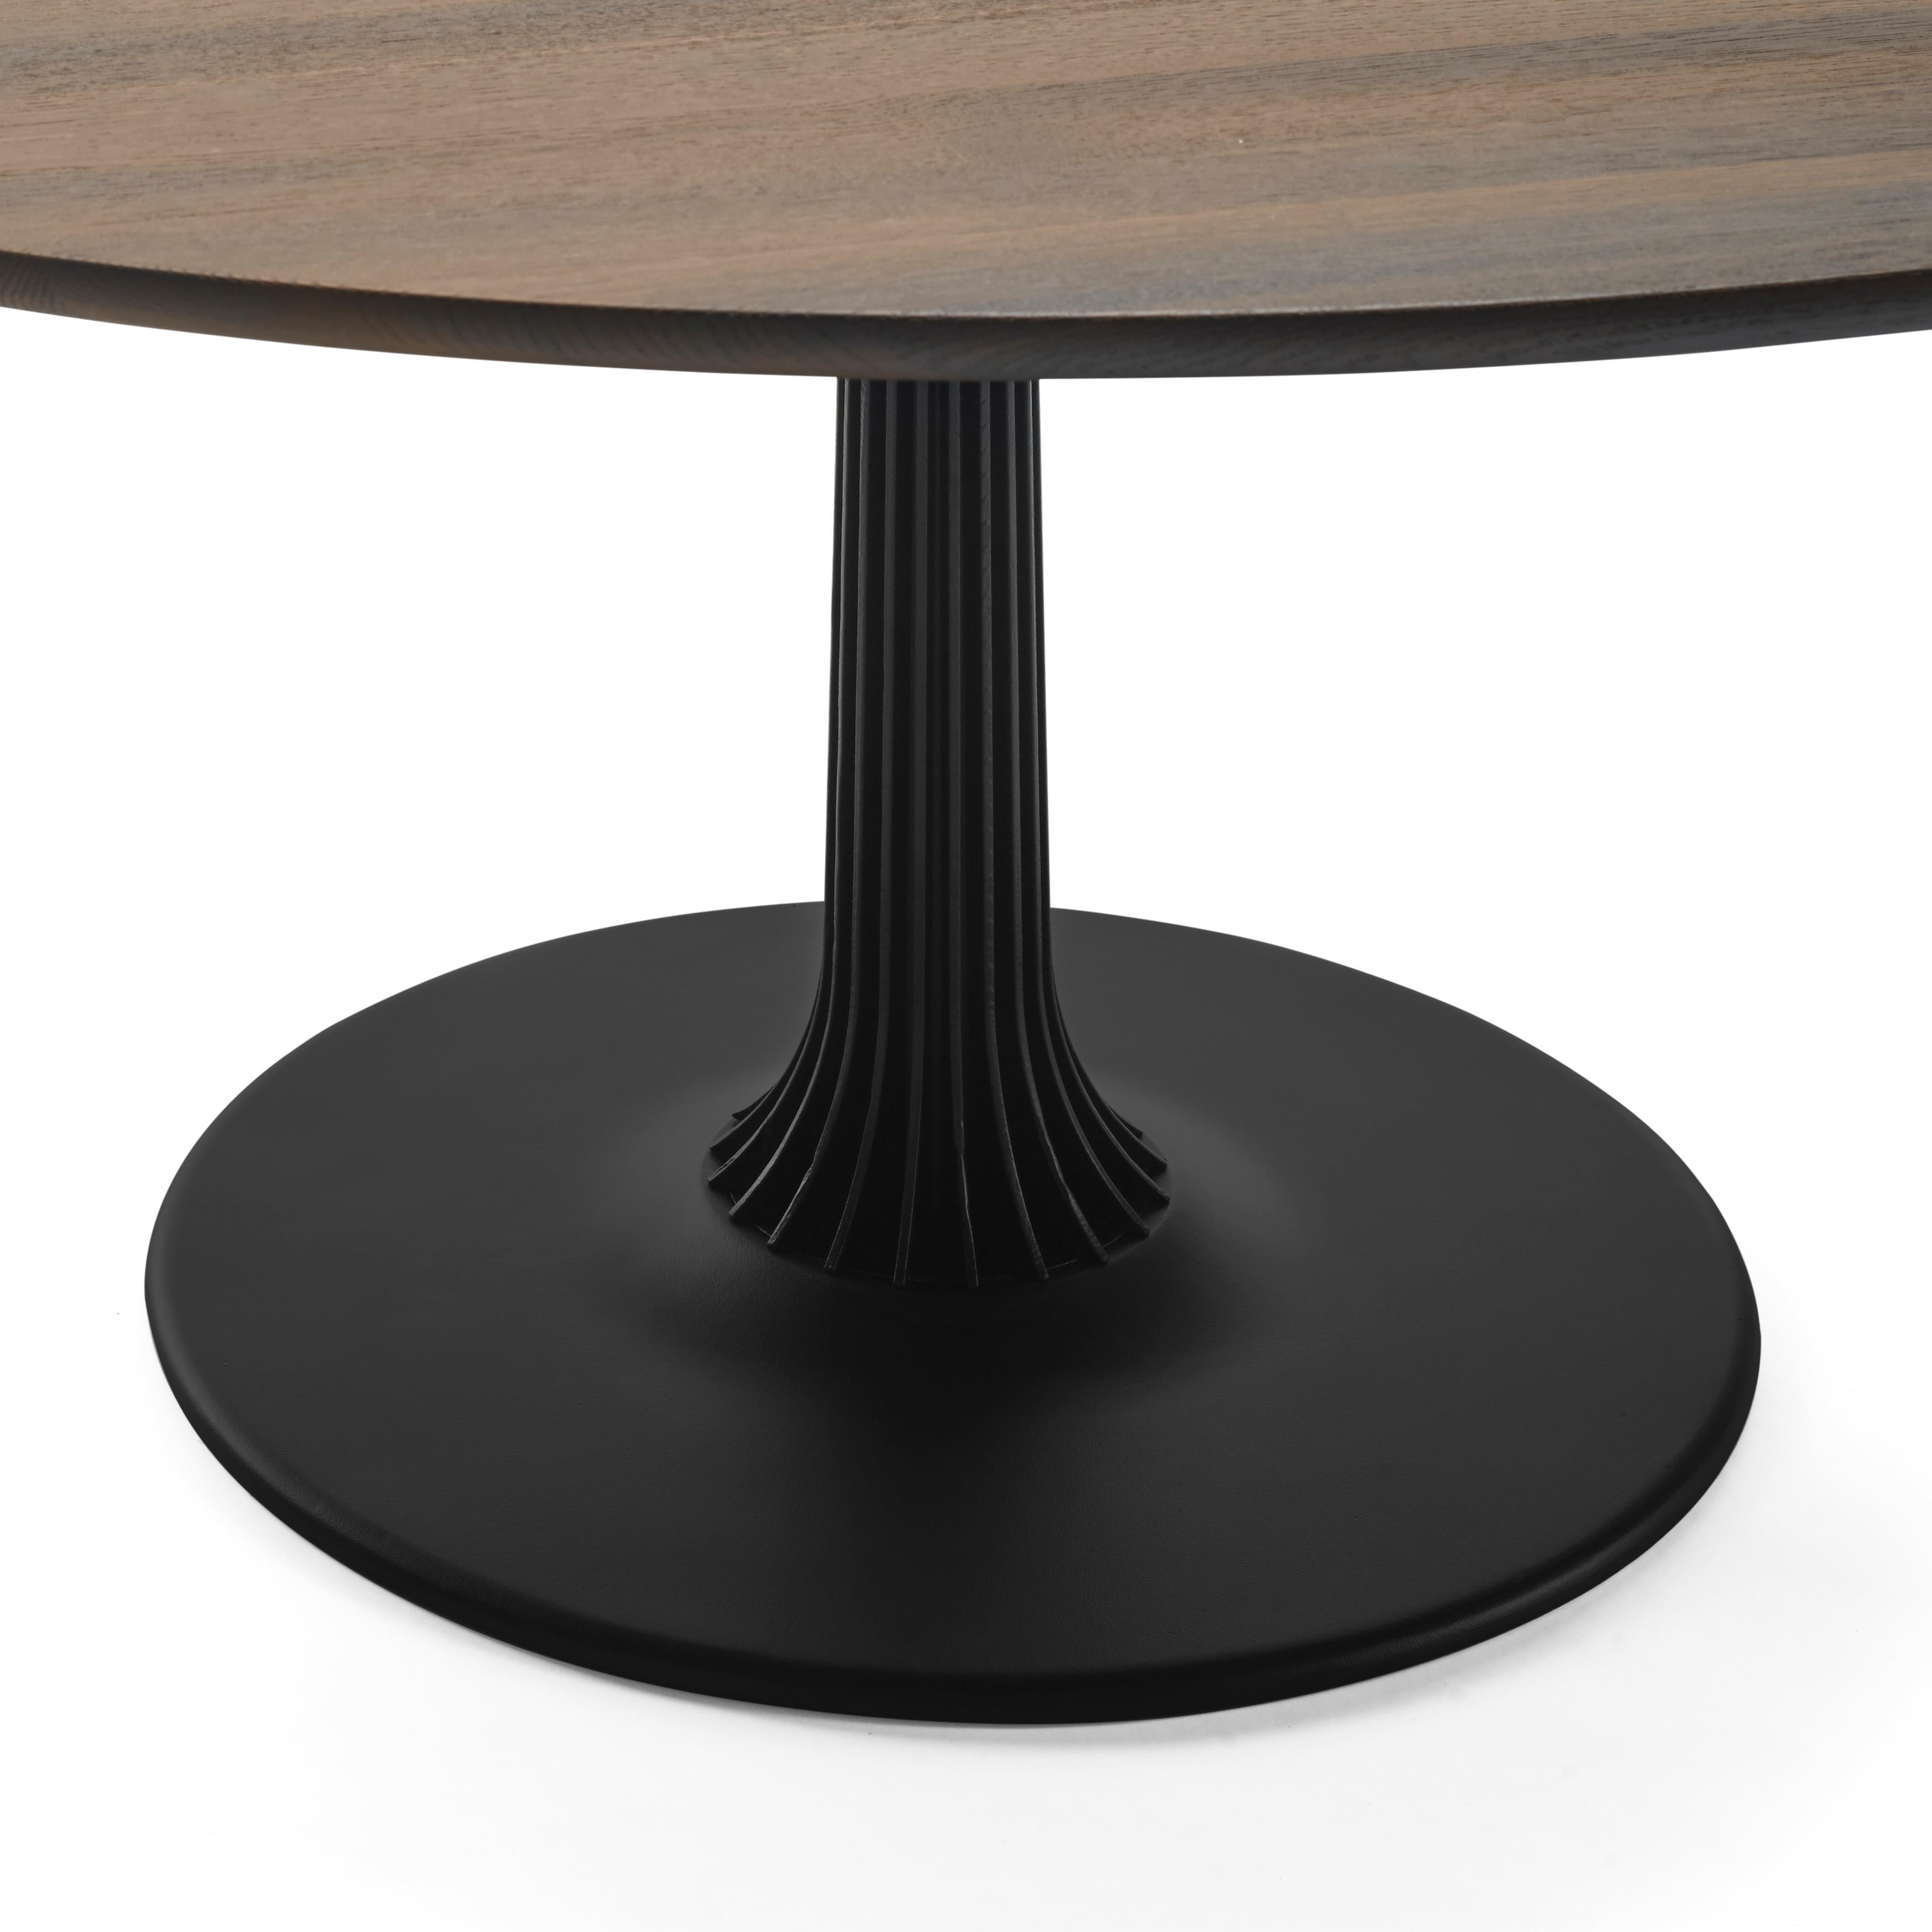 The Joist table / dining-room table is a real archetype due to its round shape. The central support column provides lots of legroom and freedom of movement. The round shape makes Joist a table for socializing: everyone can see each other. The